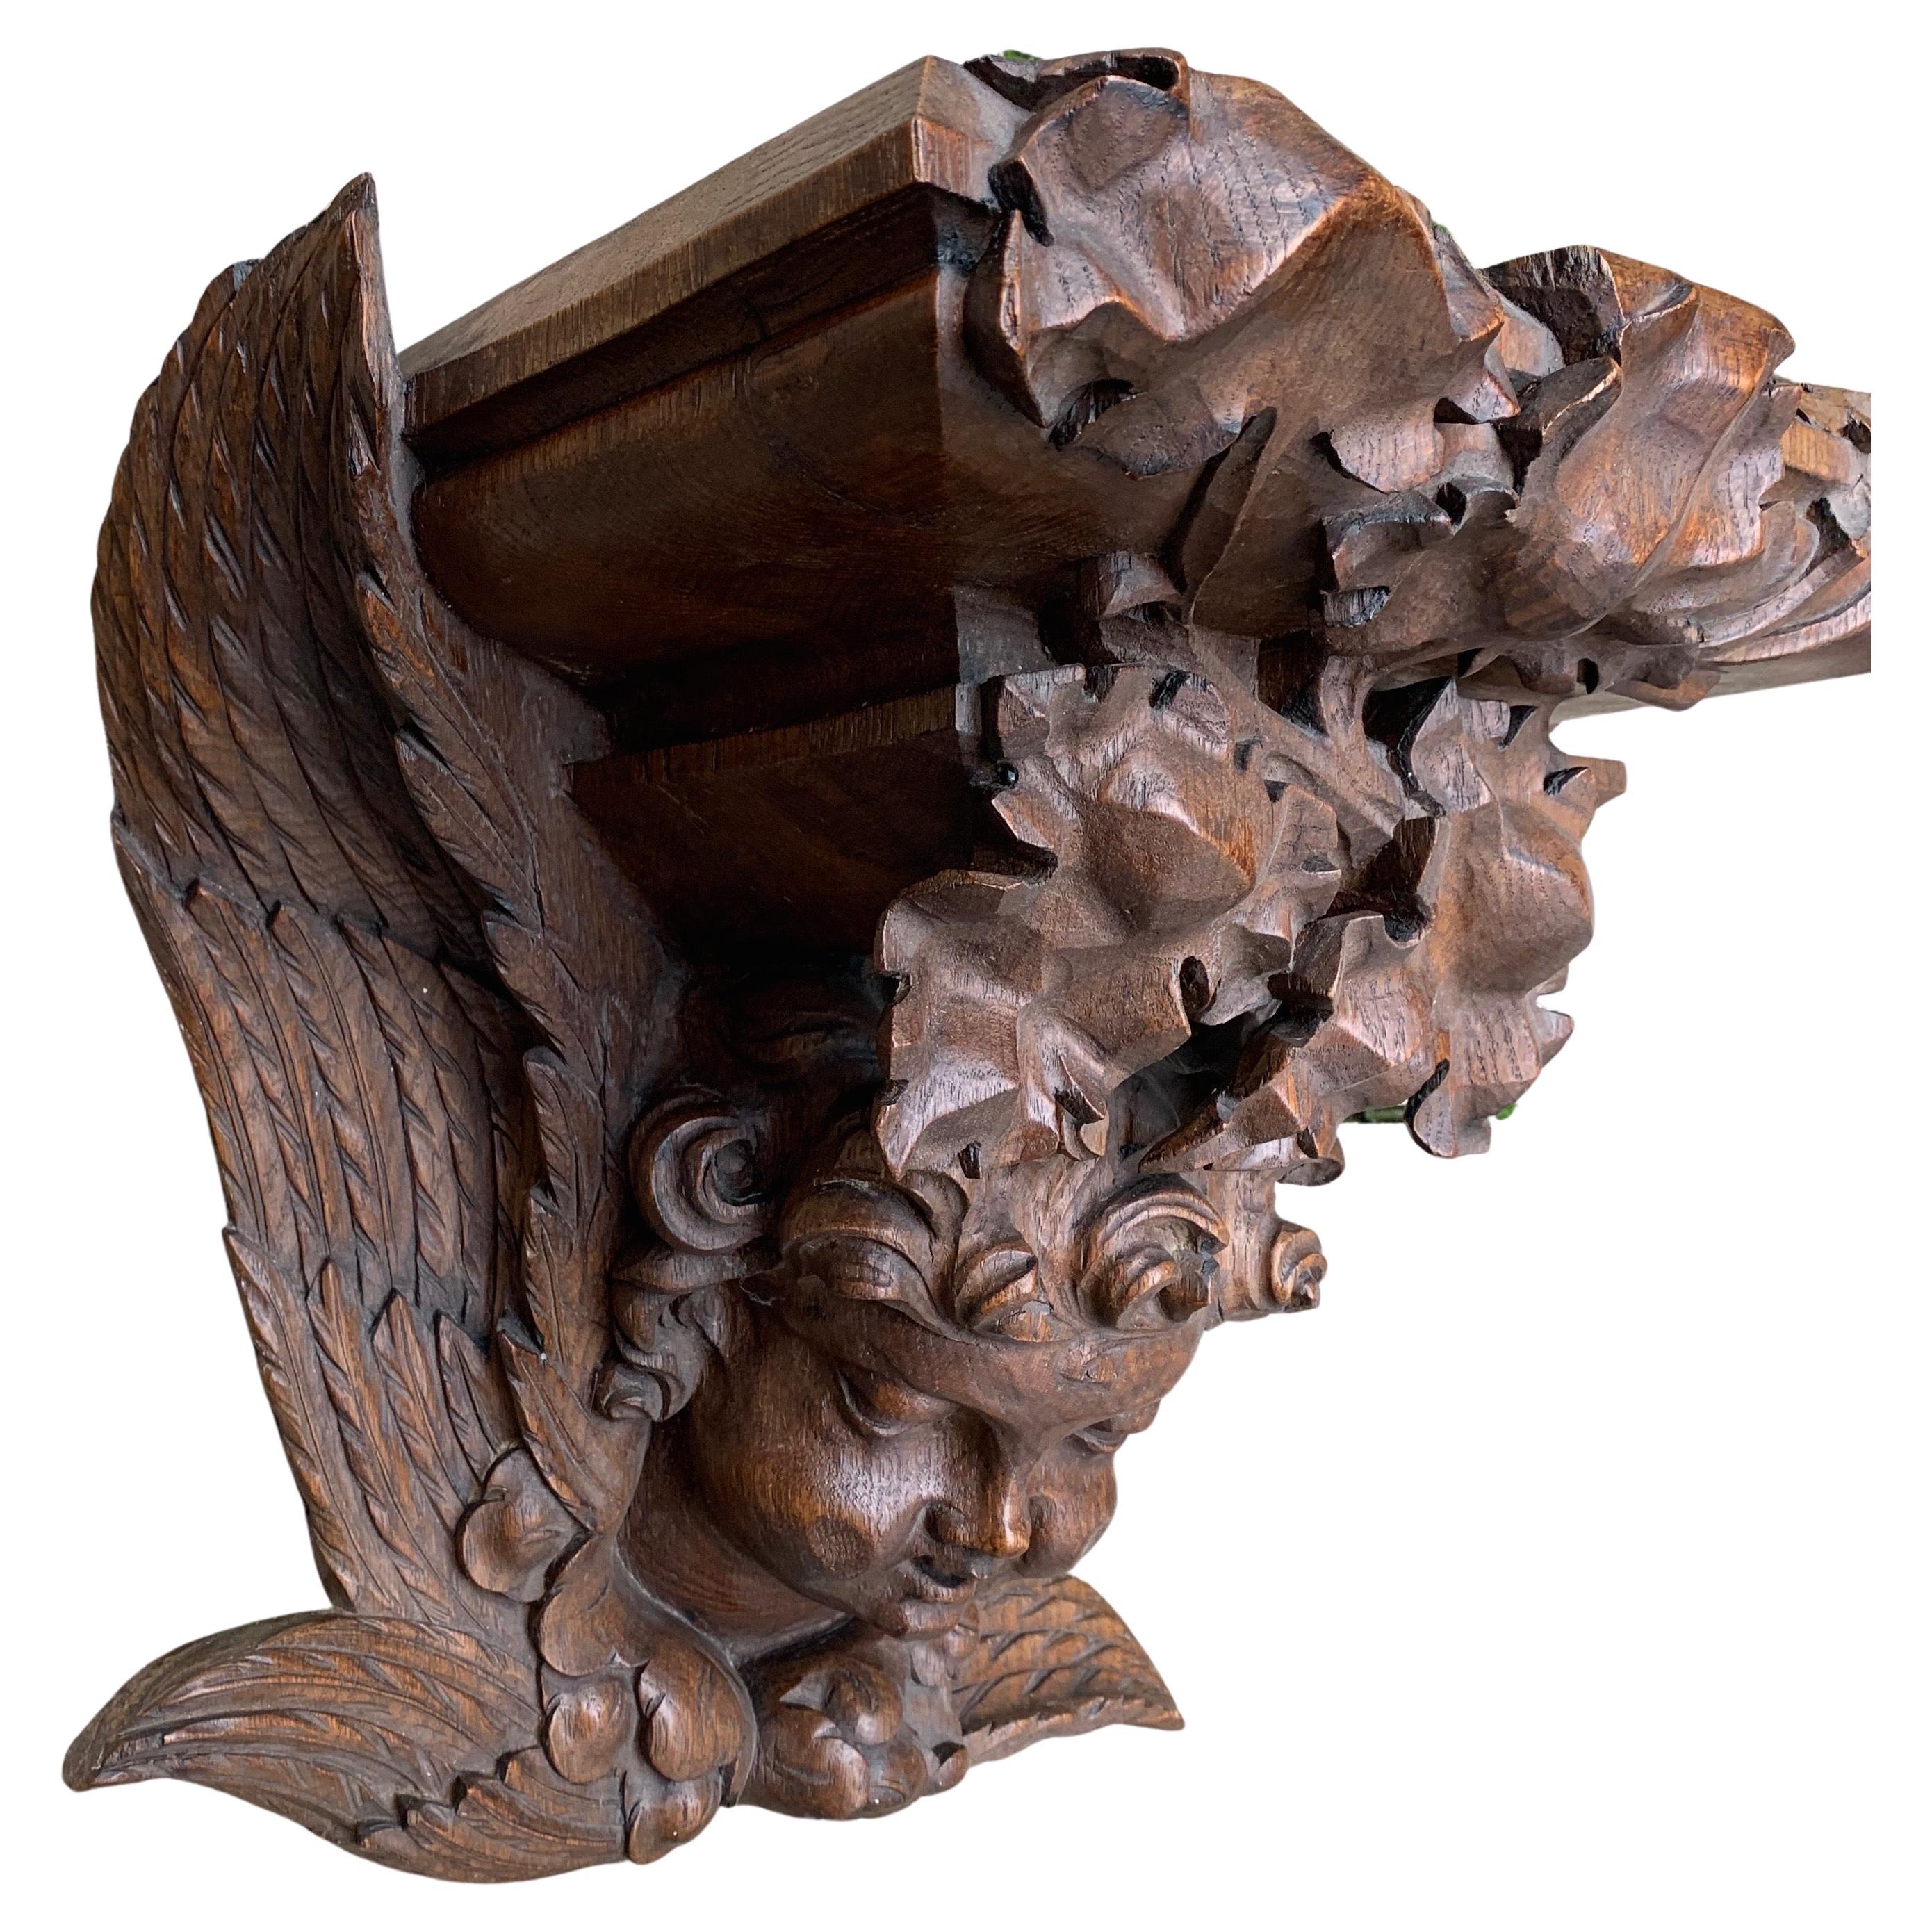 Amazingly hand carved church wall bracket with a winged angel sculpture.

This stunning and all handcrafted, Gothic Revival wall bracket has the most wonderful shape and patina. The overall design with the natural flowing and deeply carved leafs